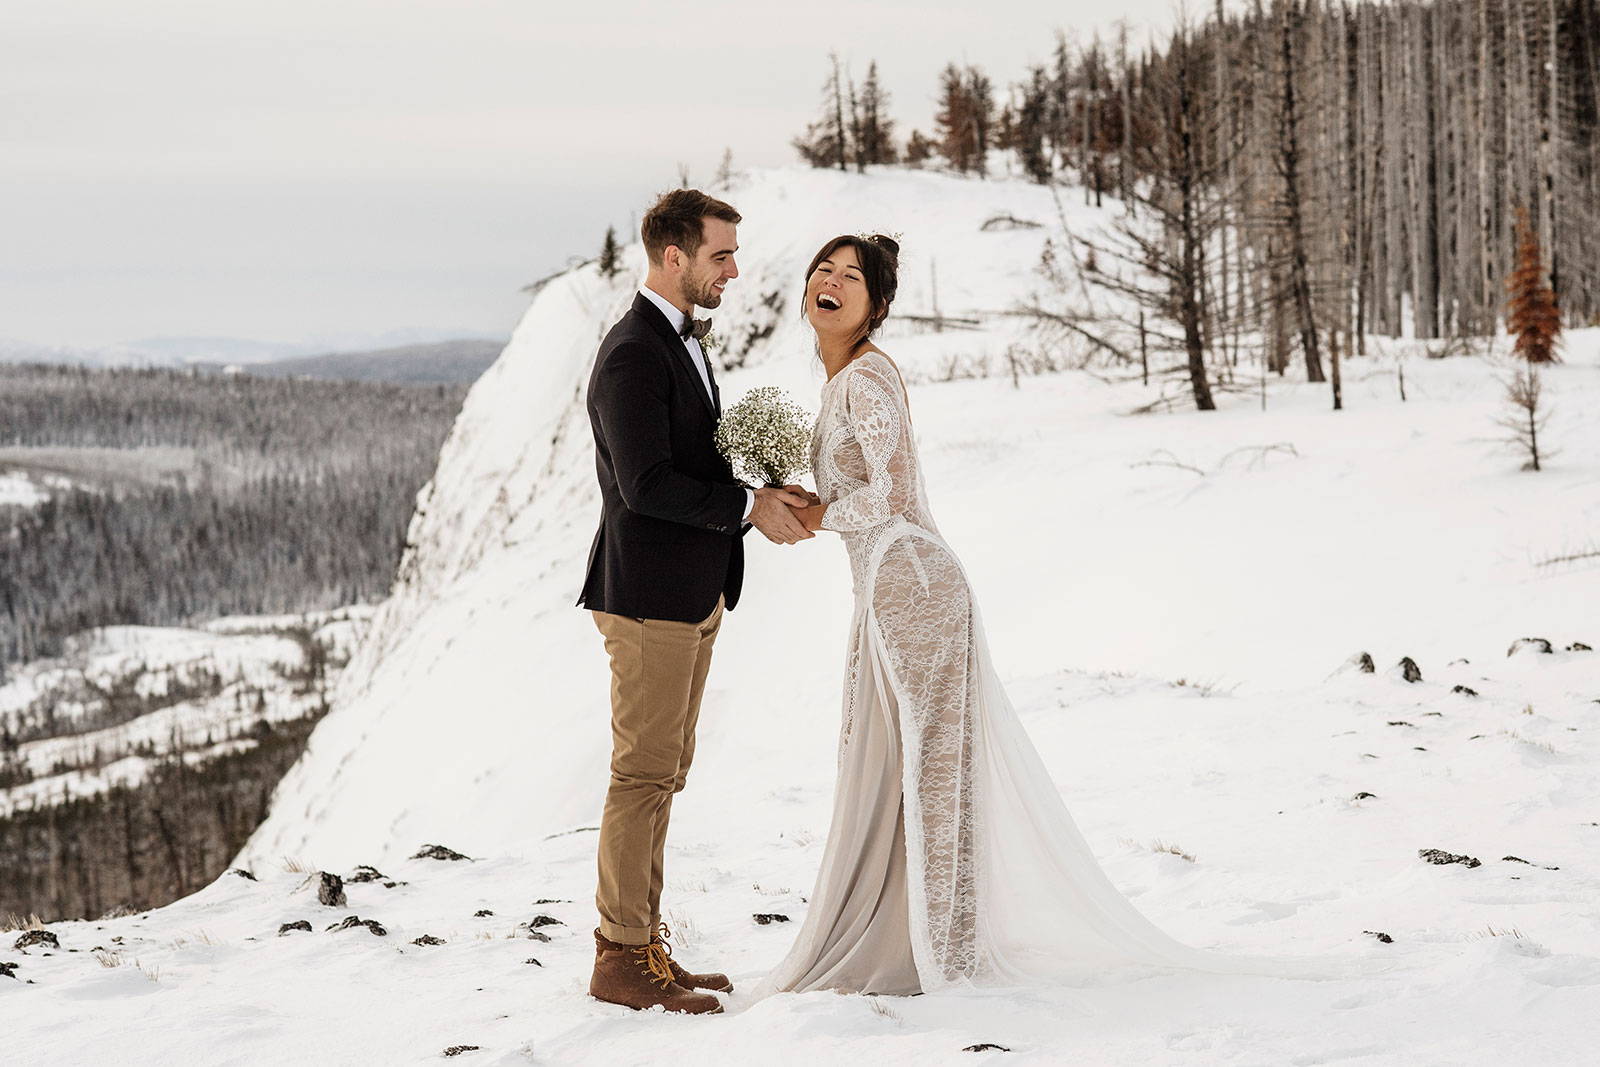 Bride and groom on top of a snowy mountain